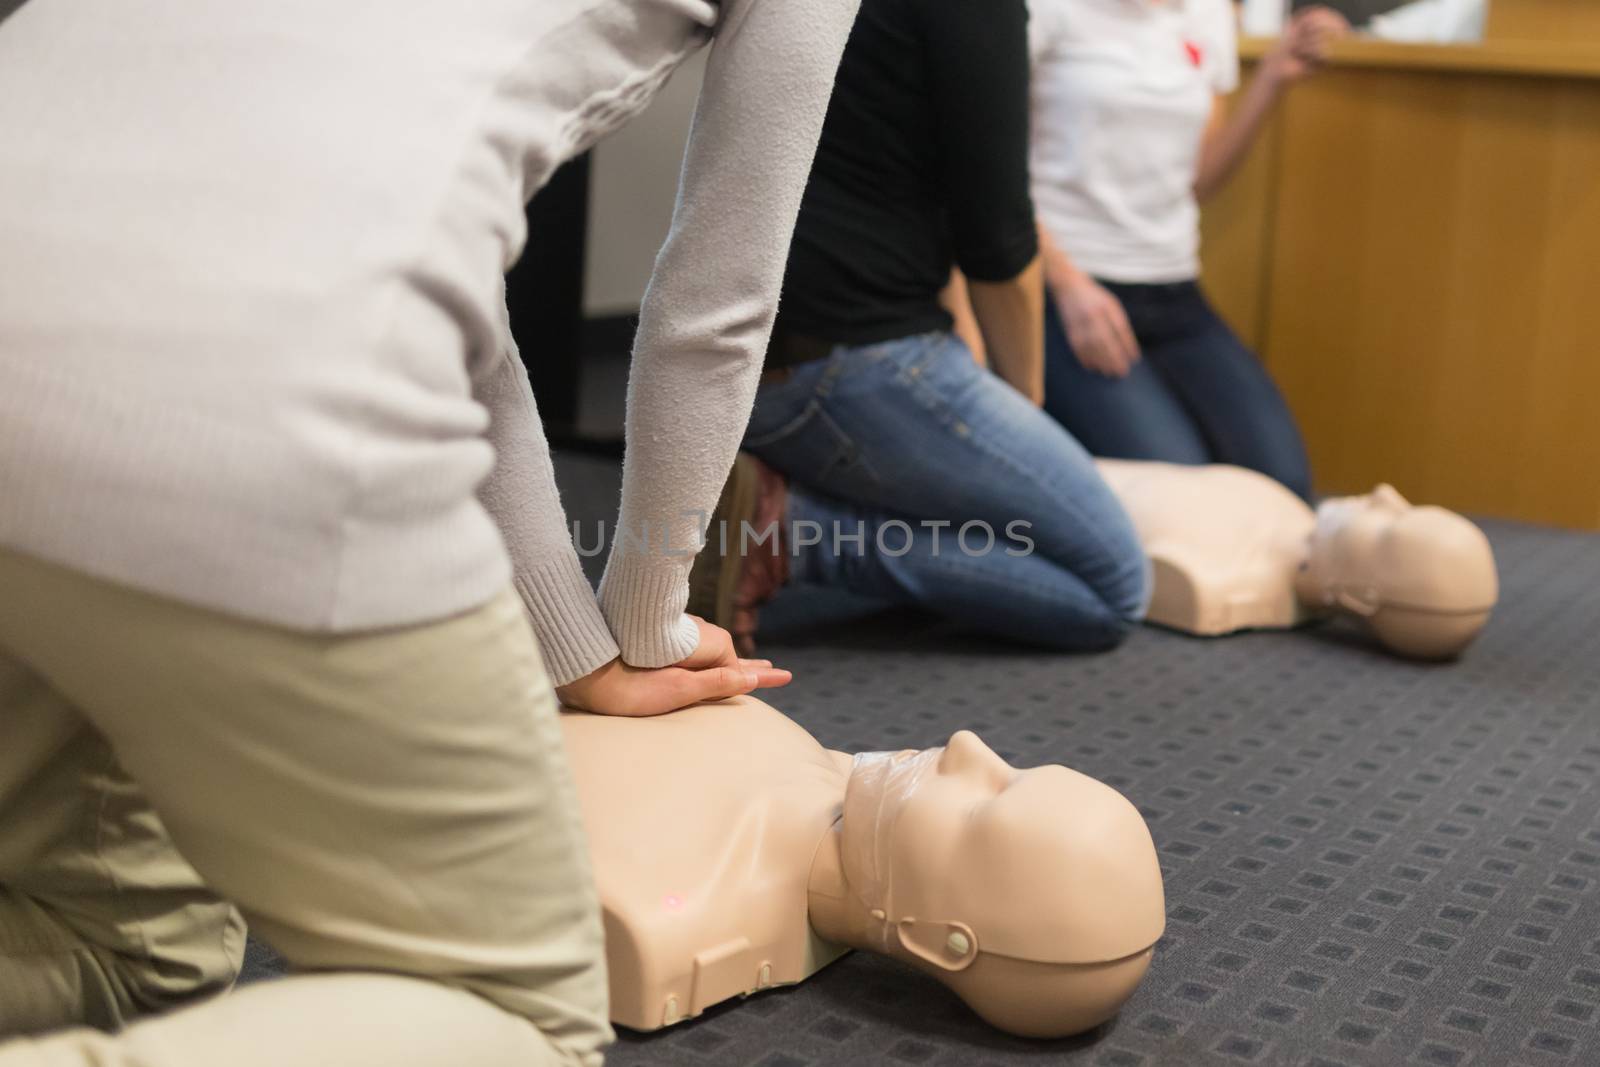 First aid CPR seminar. by kasto